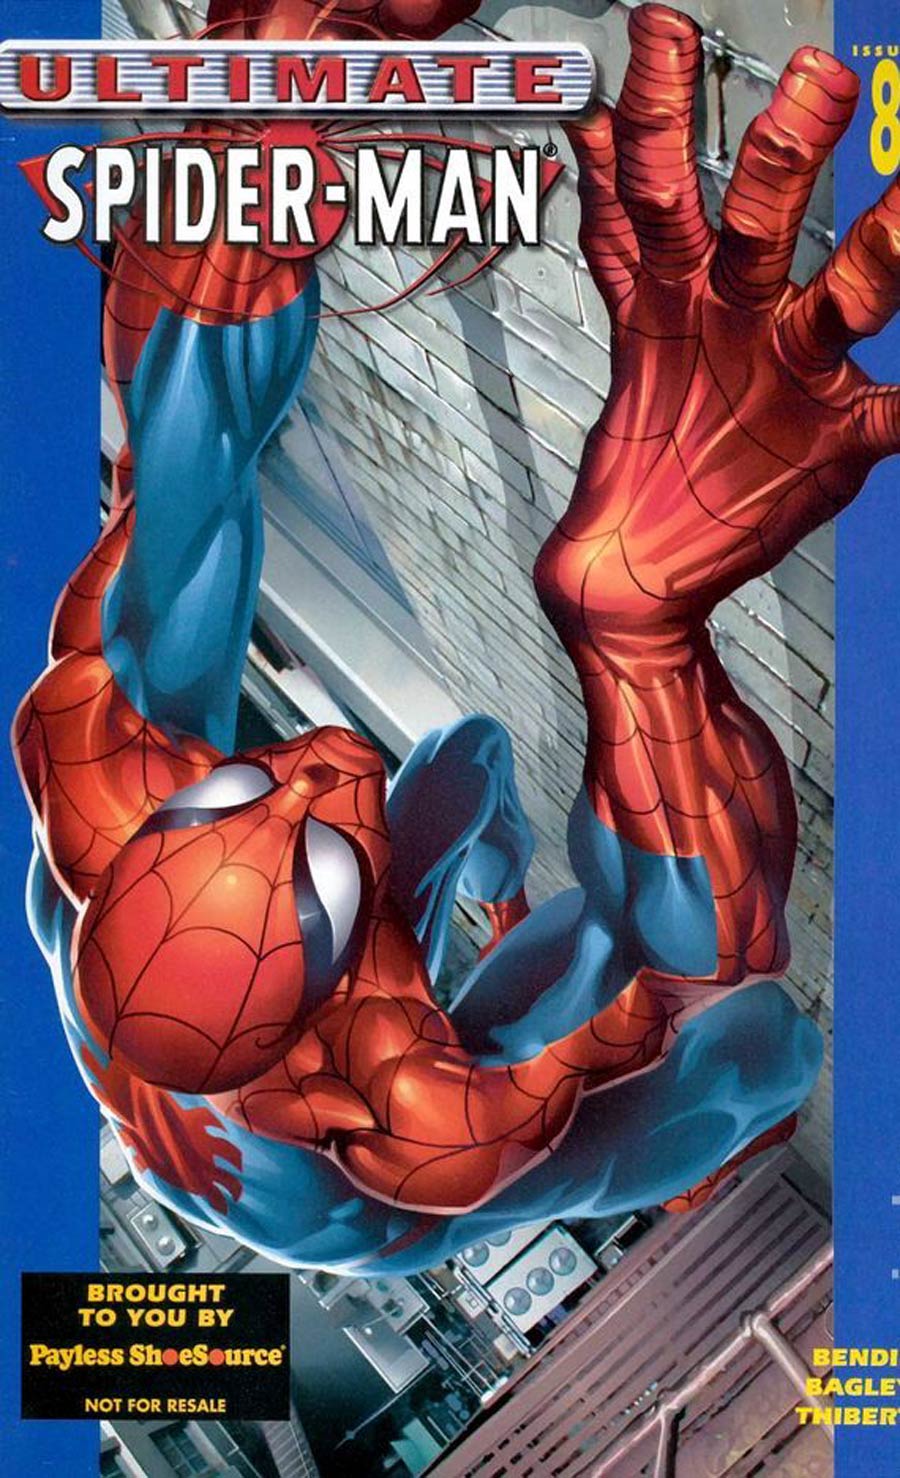 Ultimate Spider-Man #8 Cover C Payless Shoe Source Edition